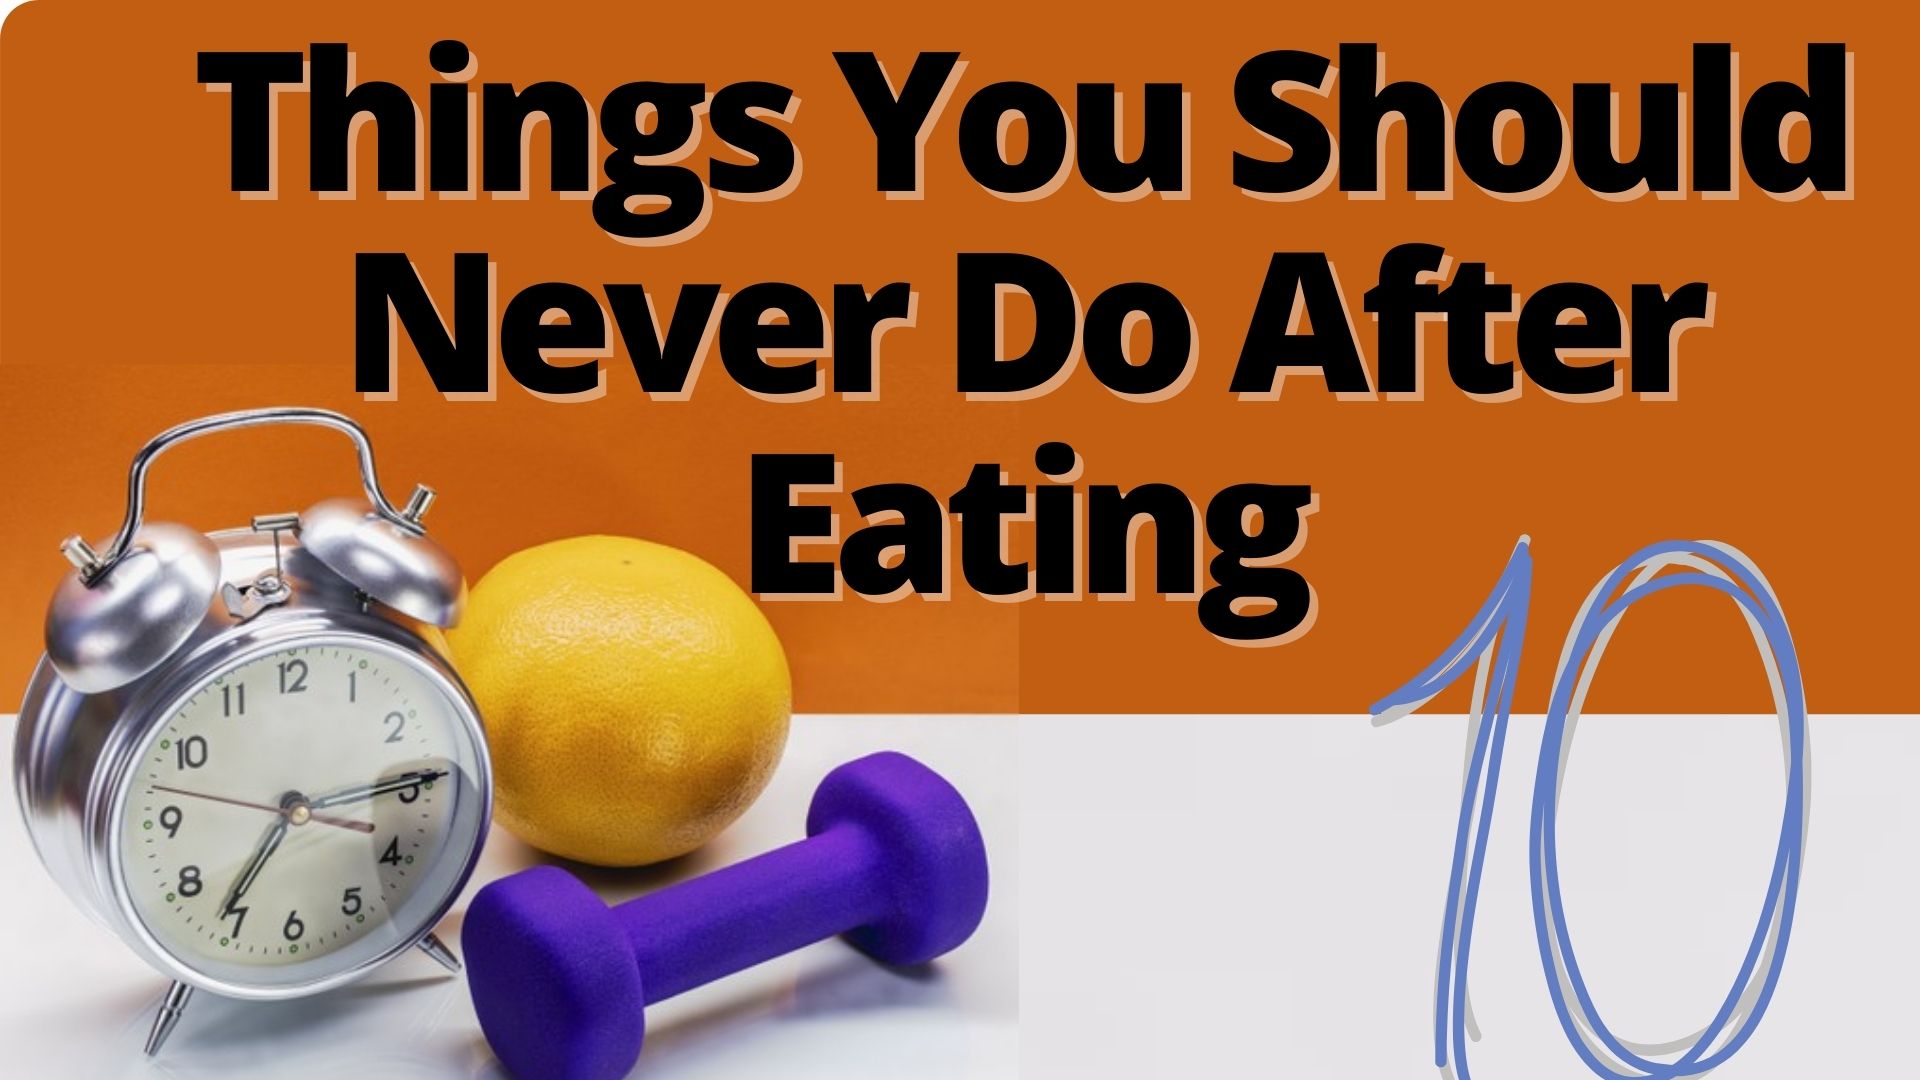 Things You Should Never Do After Eating